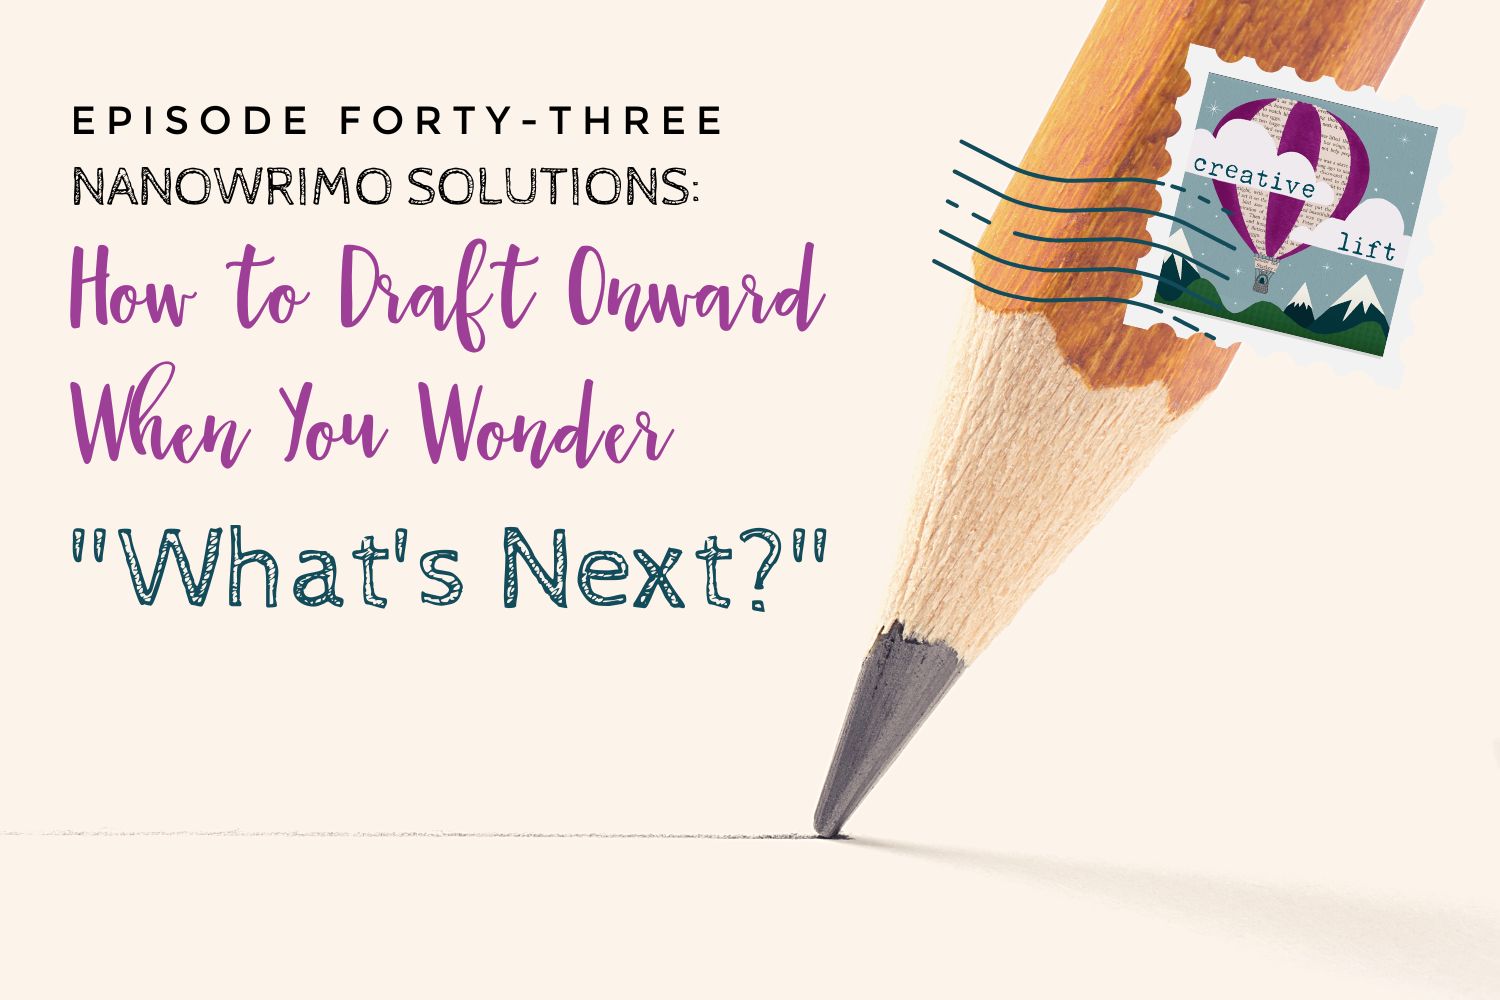 Creative Lift episode 043- NaNoWrIMo Solutions: How to Draft Onwarrd When You Wonder, "What's Next?"